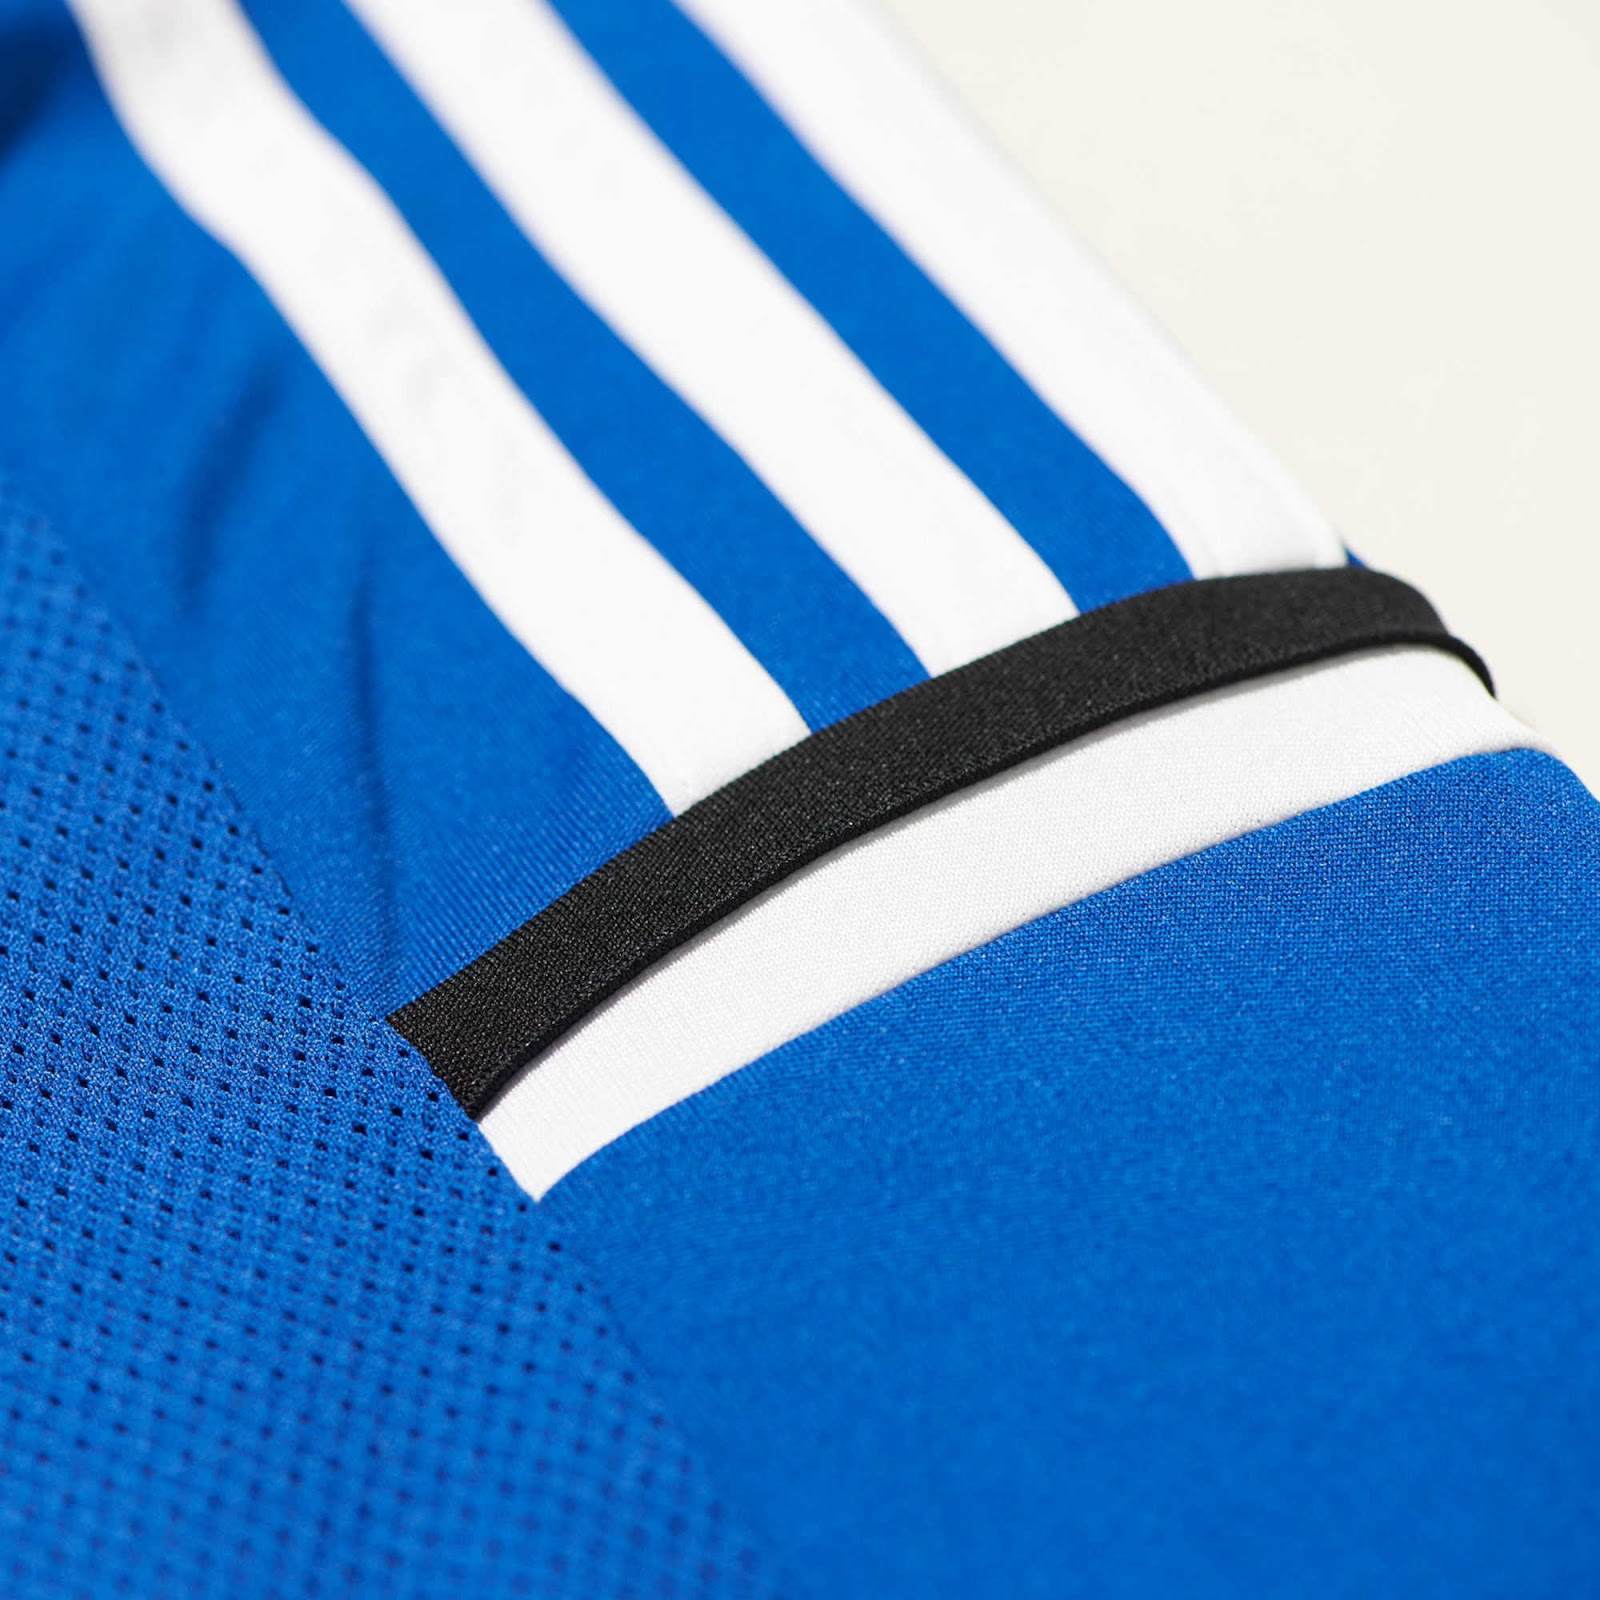 Basel 14-15 Home and Away Kits Released - Footy Headlines